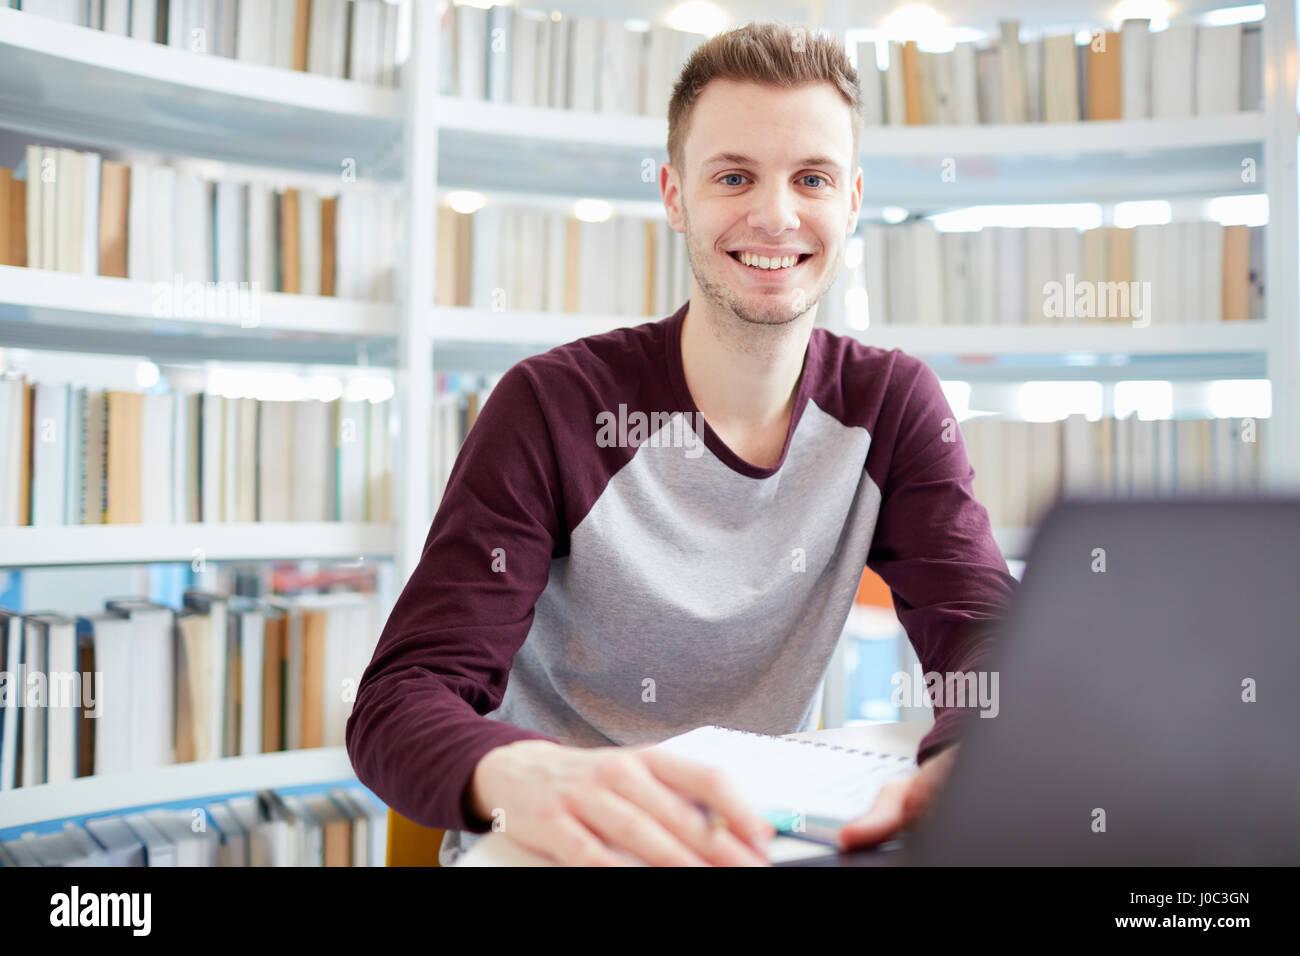 University Student working in library Banque D'Images